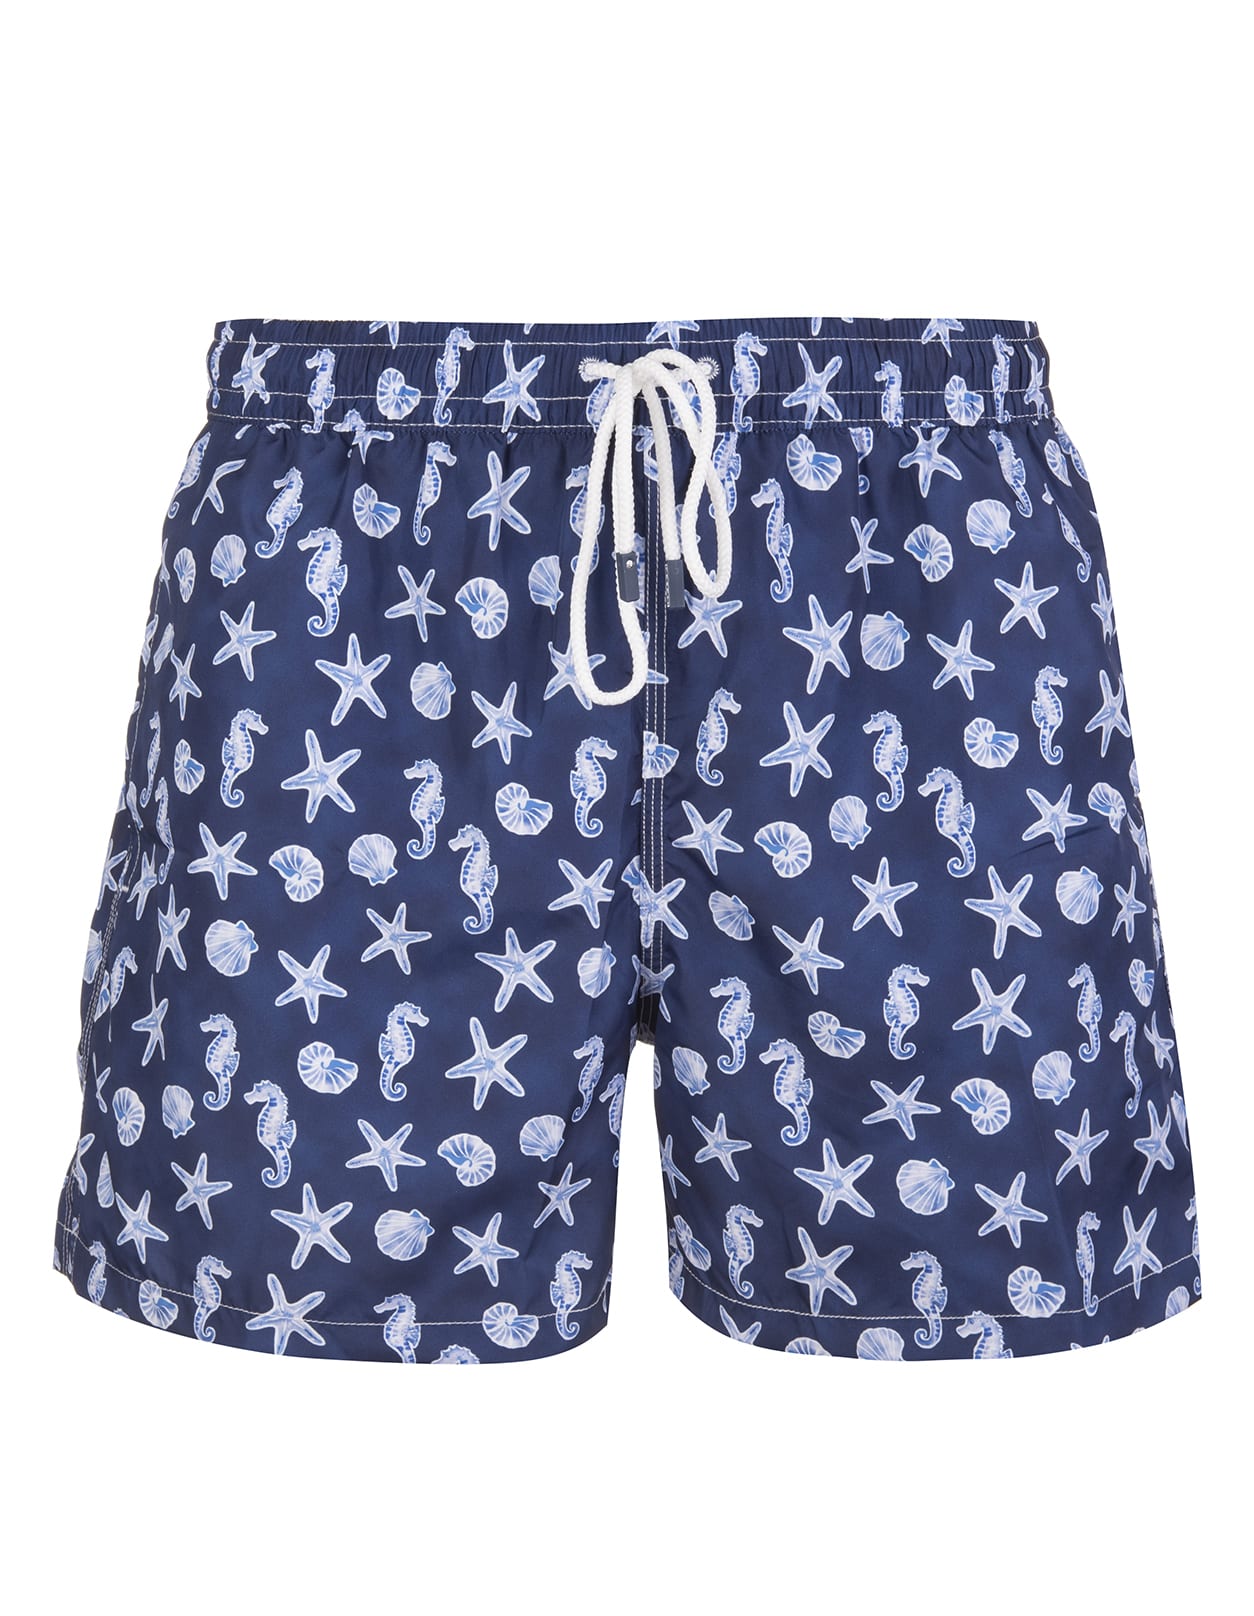 Fedeli Navy Blue Swimming Trunks With Marine Print